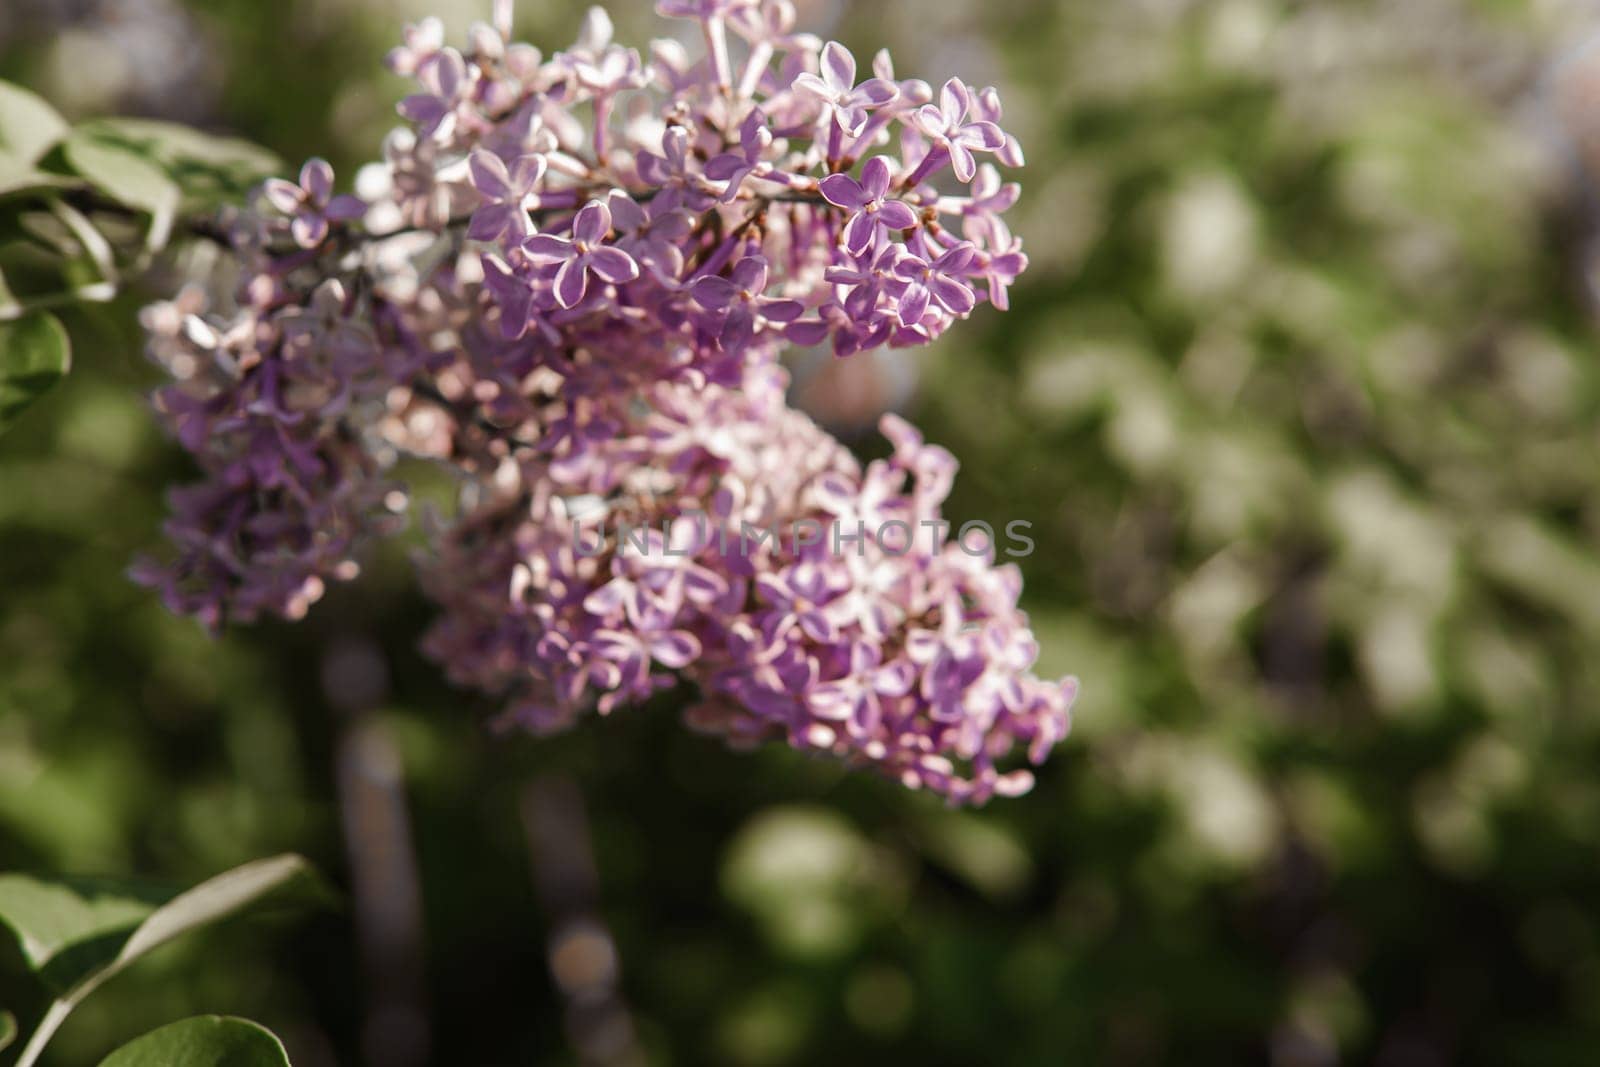 Lilac flowers on a green lilac bush close-up. Spring concert. Lilac garden. by Annu1tochka